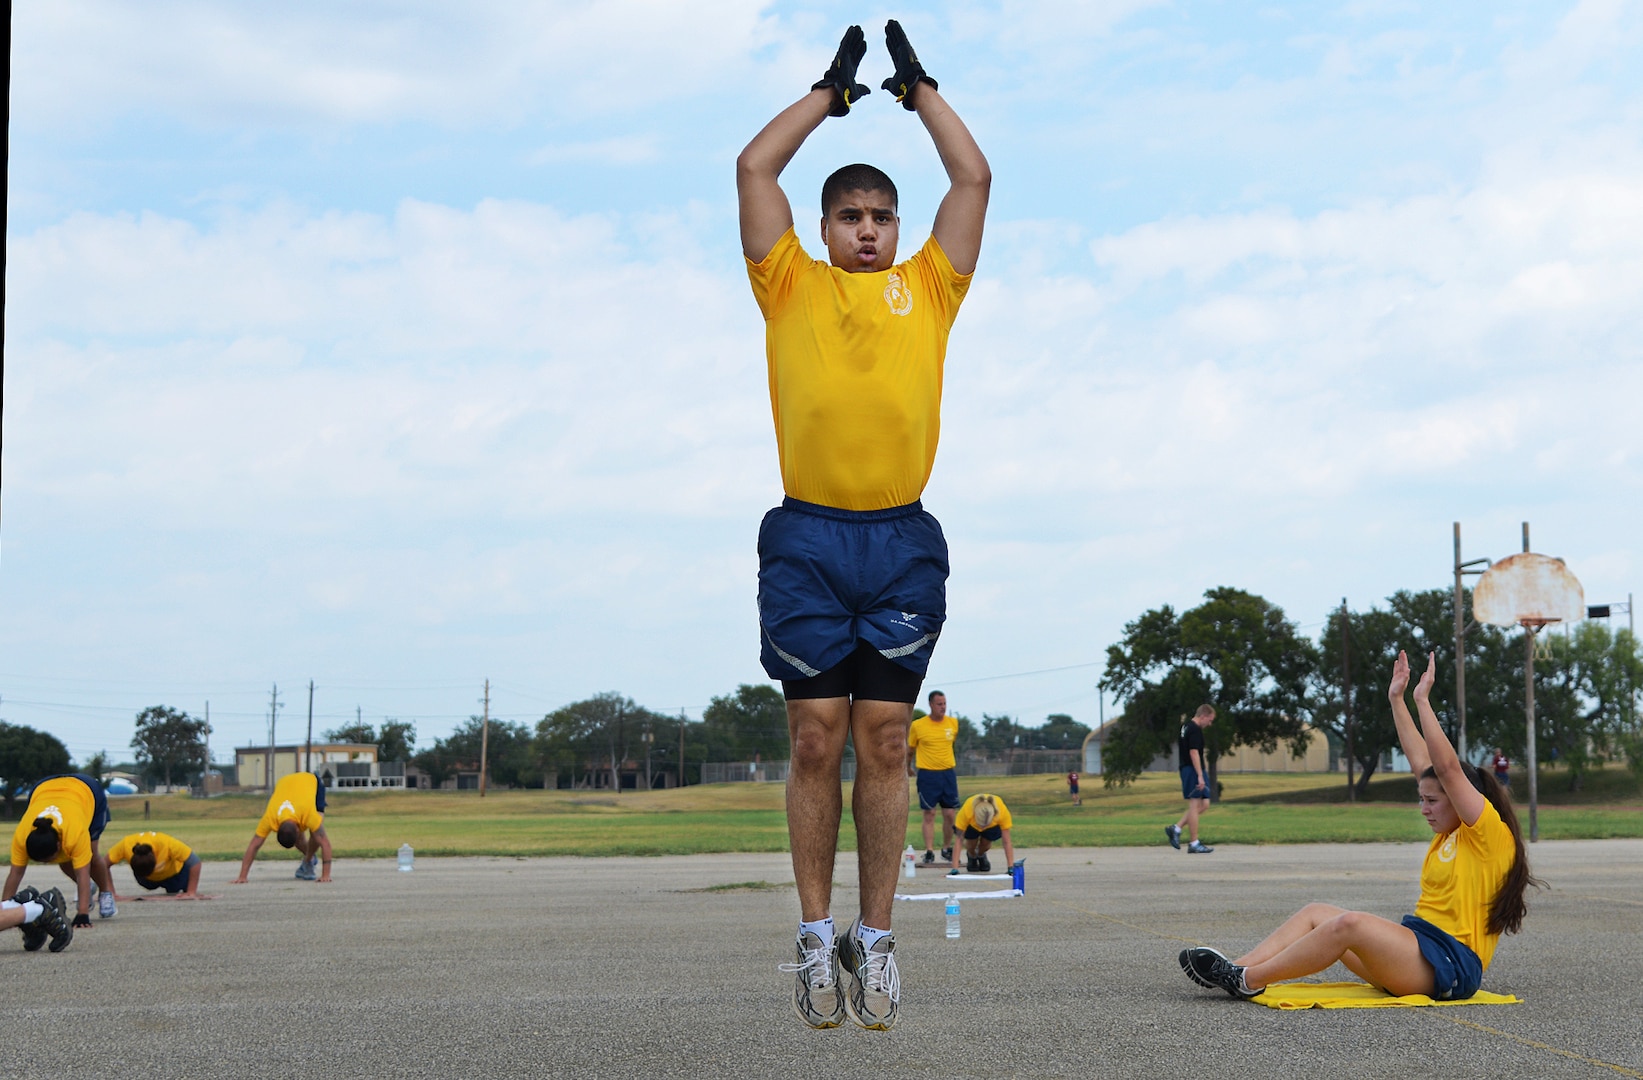 Senior Airman Robert Terwilliger, 59th Dental Support Squadron dental lab technician, takes part in the warrior workout at the Airman Leadership School August 19, at Joint Base San Antonio-Lackland. (U.S. Air Force photo by Benjamin Faske/released)